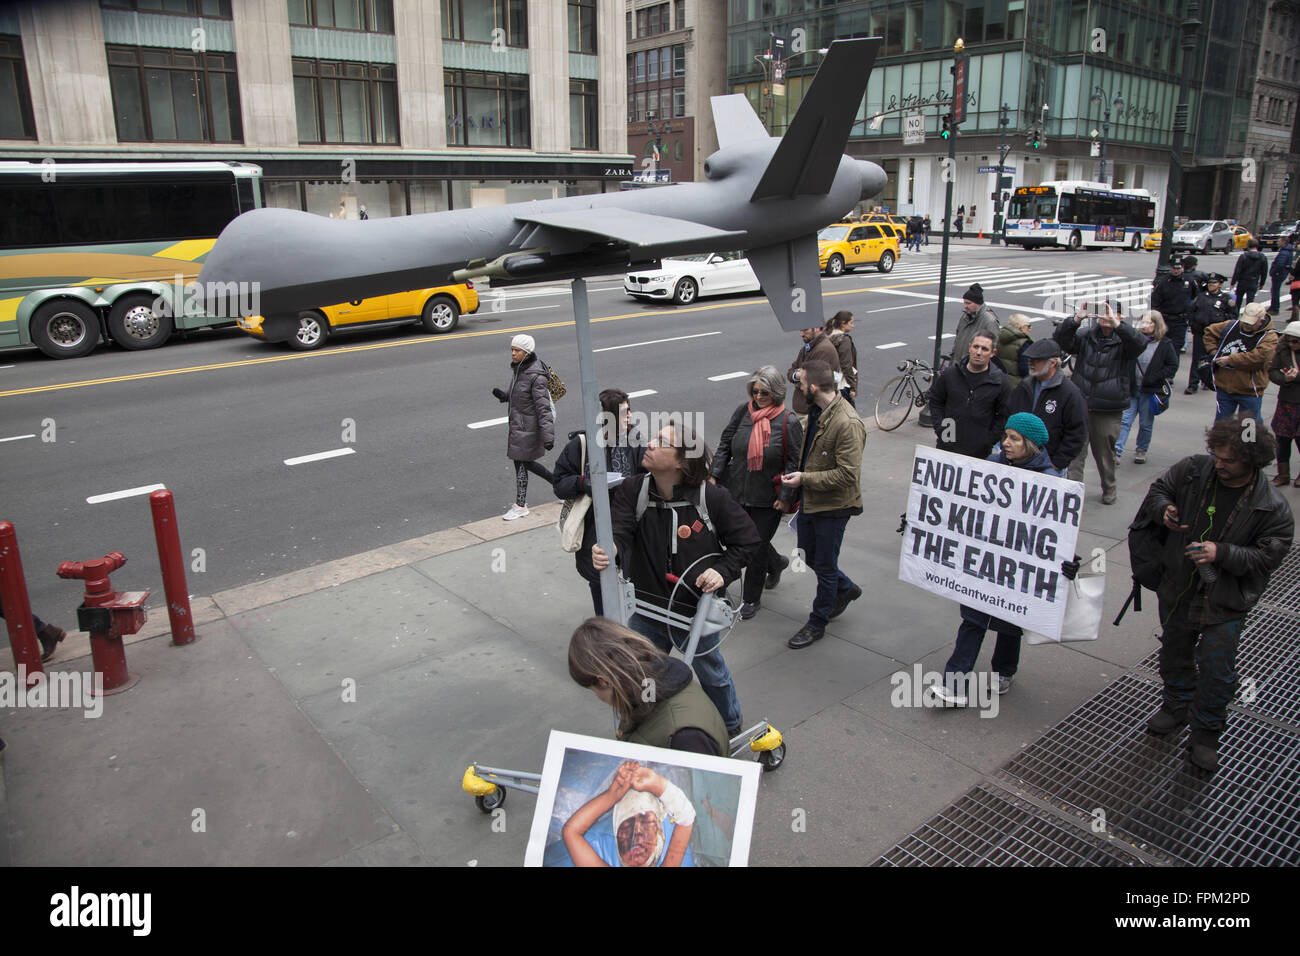 New York, USA. 19th Mar, 2016. Coalition of activist groups march and have a silent vigil bringing attention to the out of control destructiveness of U.S. militarism accomplishing nothing positive and displacing whole societies as in Iraq & Syria. Credit:  David Grossman/Alamy Live News Stock Photo